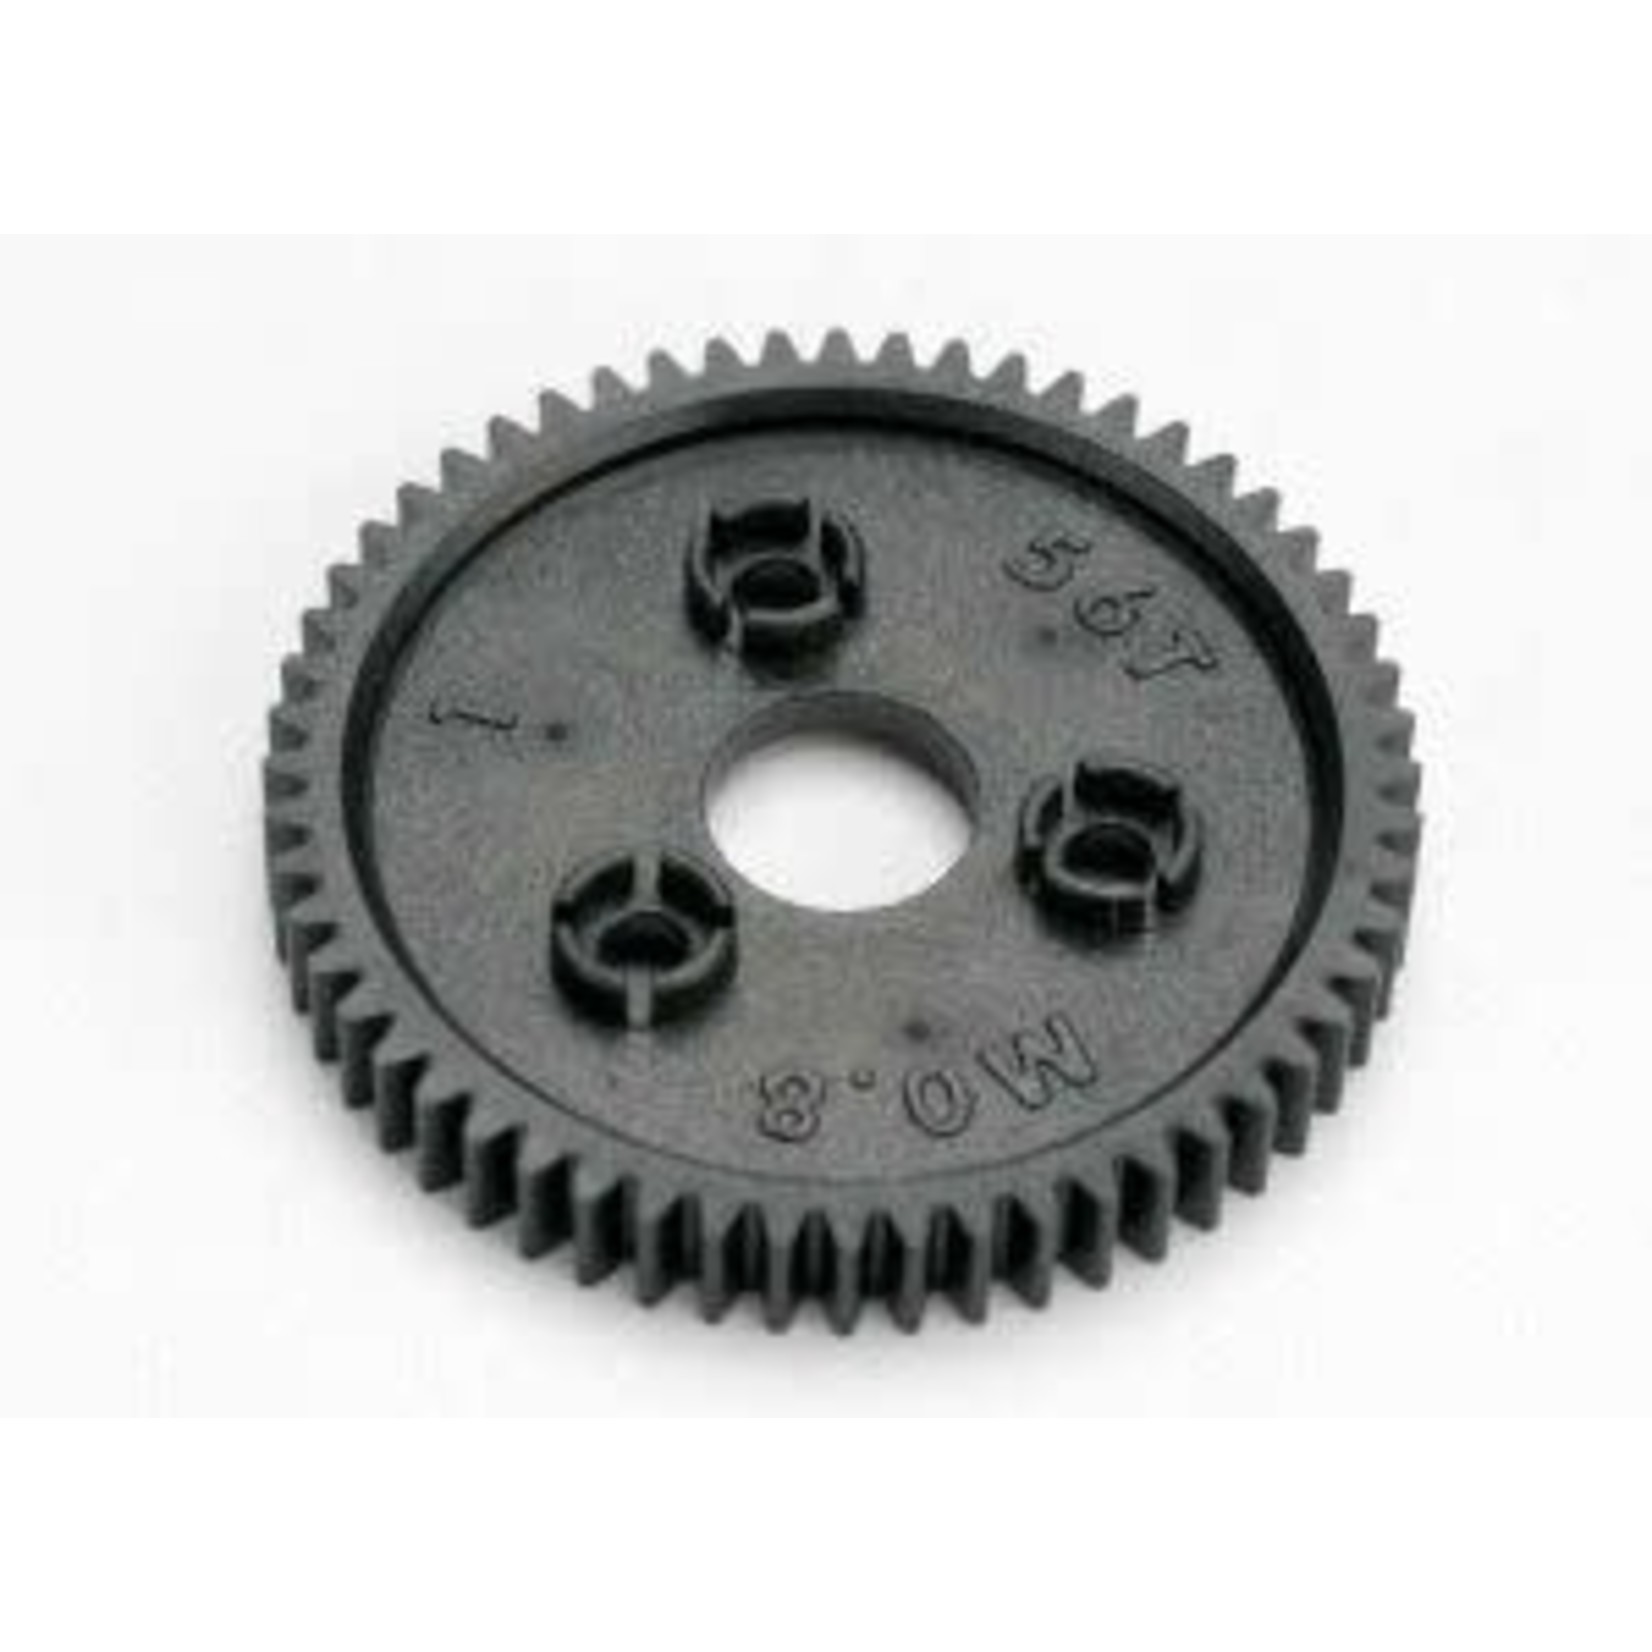 Traxxas 3957 Spur gear, 56-tooth (0.8 metric pitch, compatible with 32-pitch)